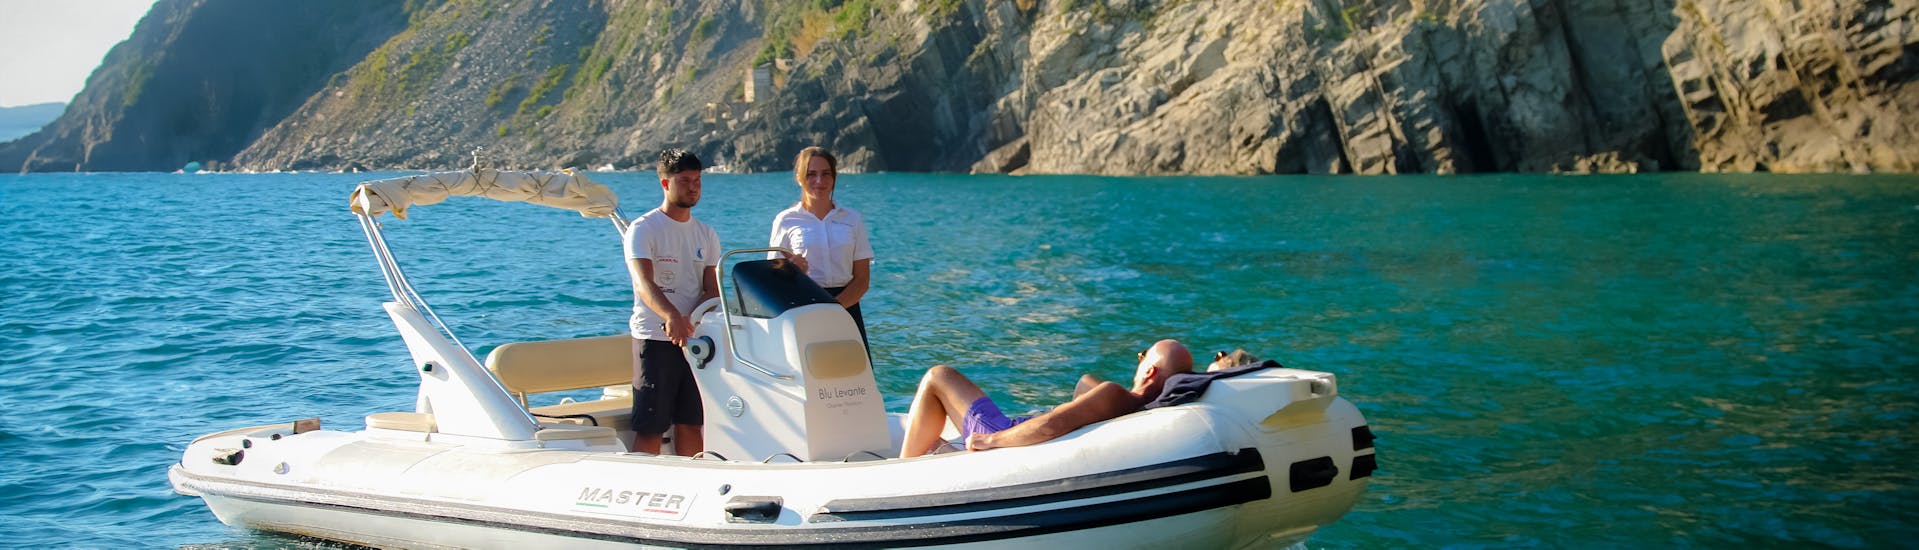 RIB Boat Rental from La Spezia (up to 6 people).